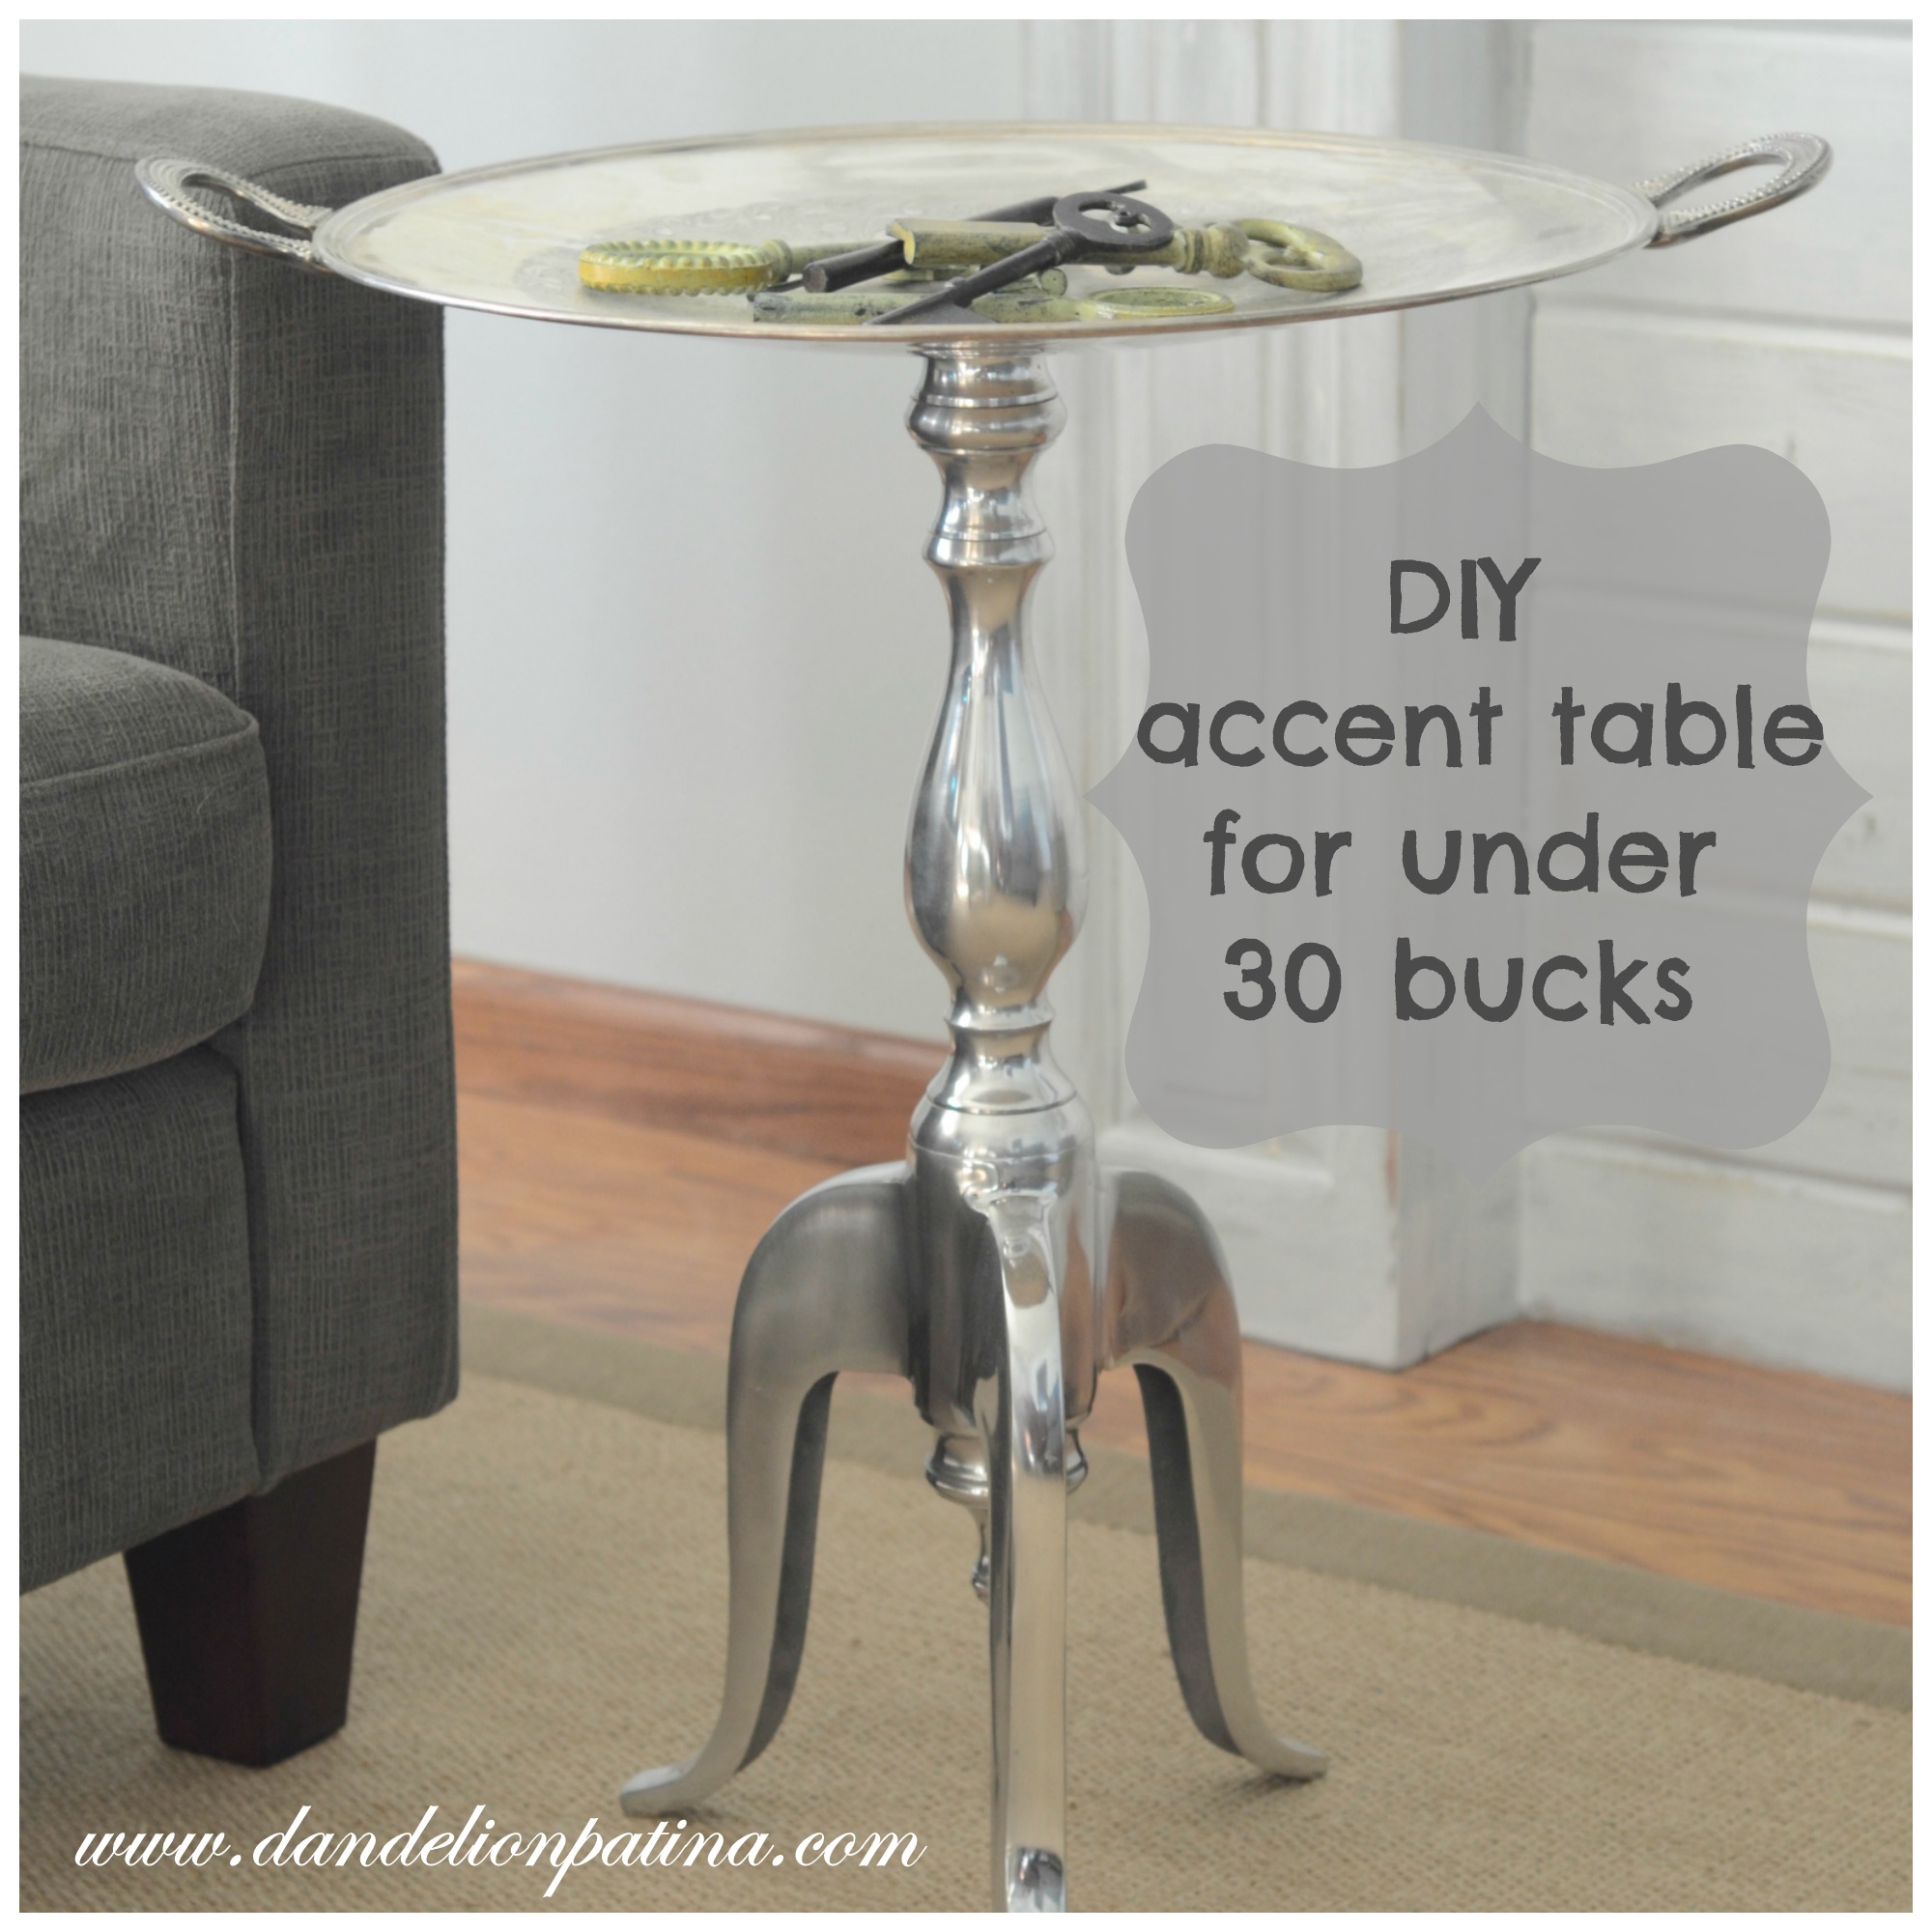 diy metal accent table dandelion patina bucks painted room essentials hairpin narrow end tables for living floor separator astoria patio pottery barn childrens pieces shelves